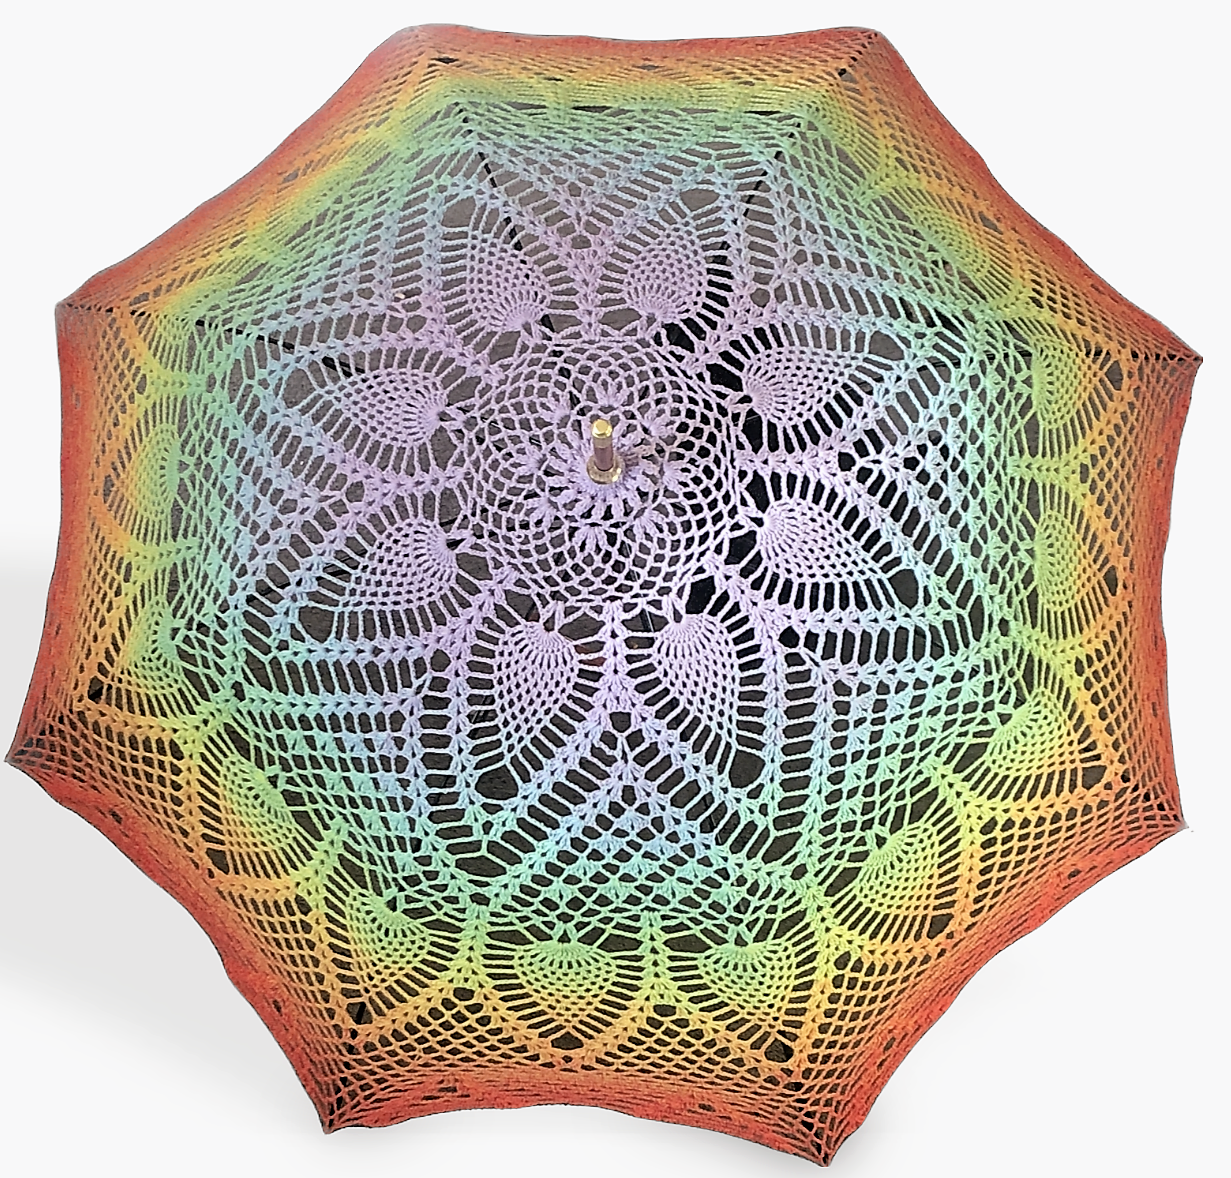 A crochet mandala is attached to an umbrella frame and wide open. The mandala features the gay pride flag in a ROYGBIV rainbow from purple at the center to red at the edge. This umbrella is 48" wide when open. 